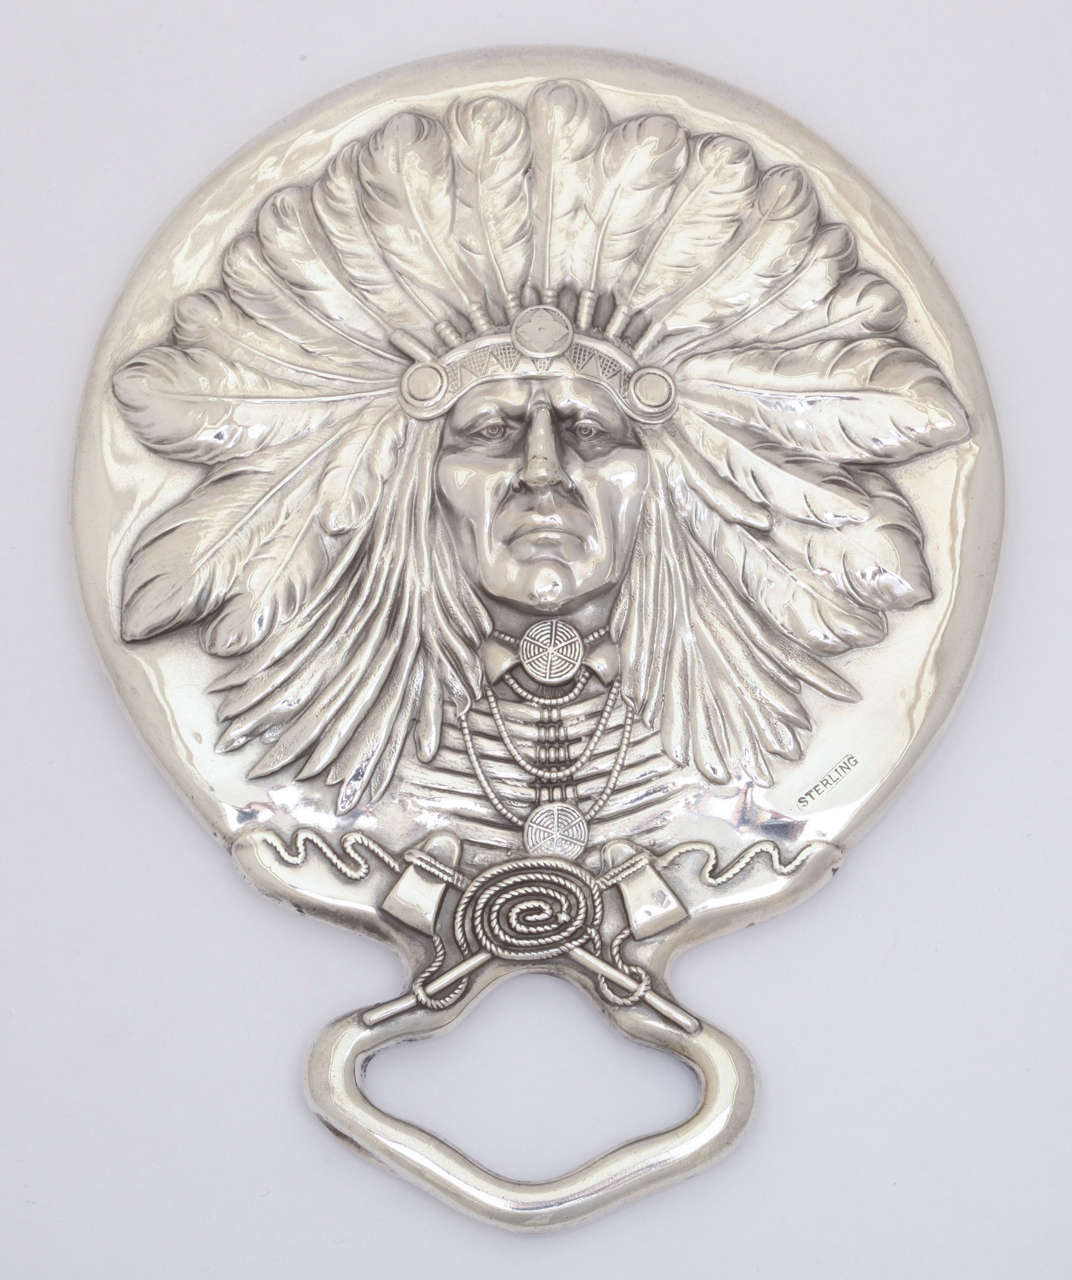 A superb Native American sterling silver shaving mirror by Unger Brothers. This highly detailed piece depicts an Indian Chief in full headdress. Made of sterling silver in a high relief pattern. The definition and detail is superb and demonstrates